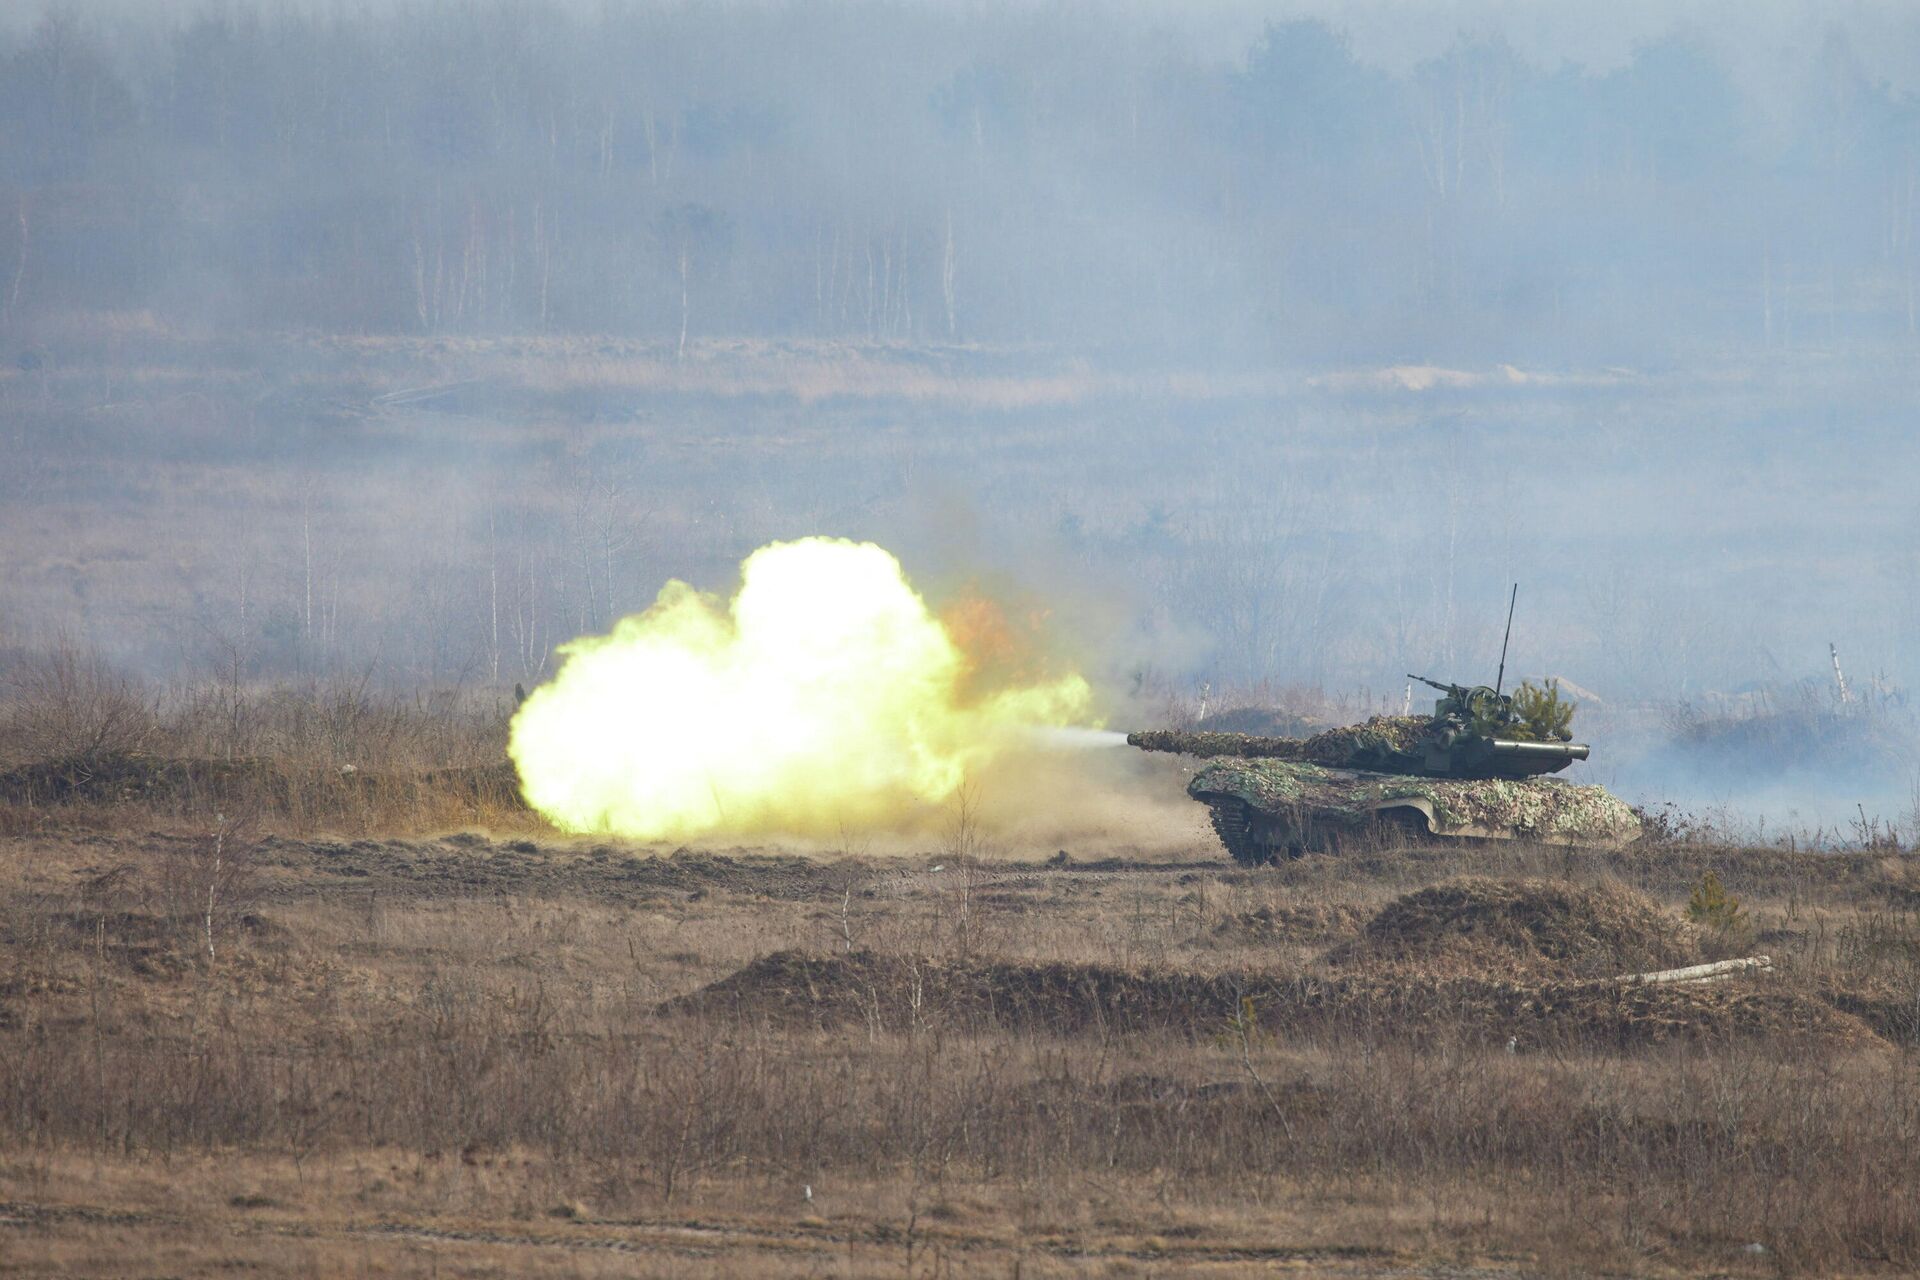 A tank of the Ukrainian armed forces fires during tactical military exercises at a training ground in the Rivne region, Ukraine February 16, 2022 - Sputnik International, 1920, 24.02.2022